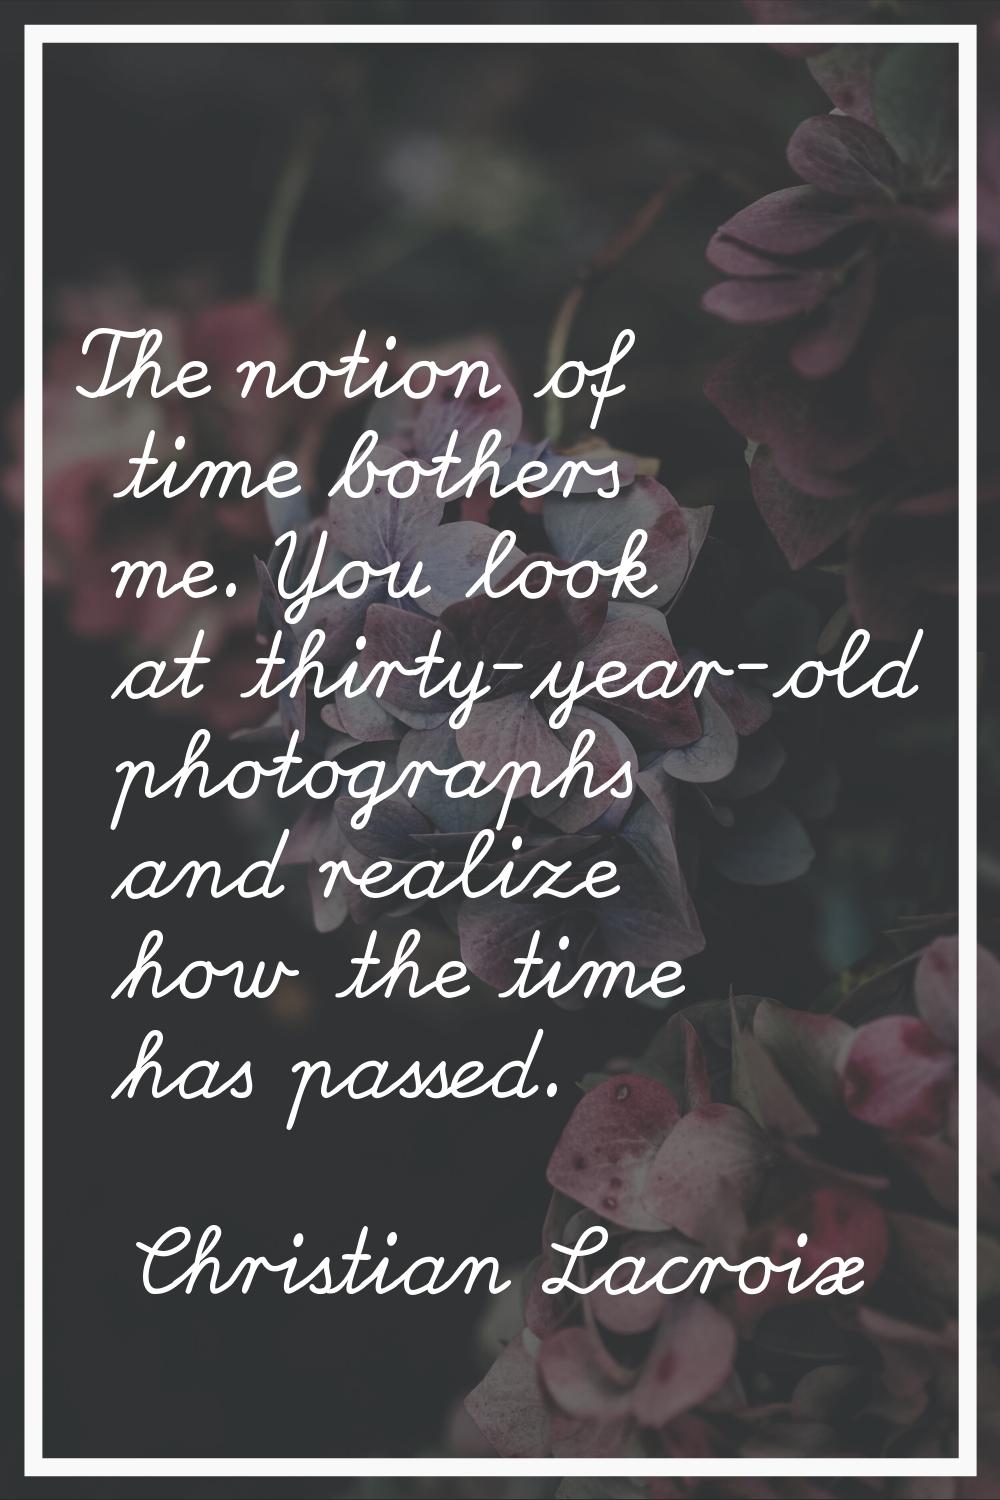 The notion of time bothers me. You look at thirty-year-old photographs and realize how the time has